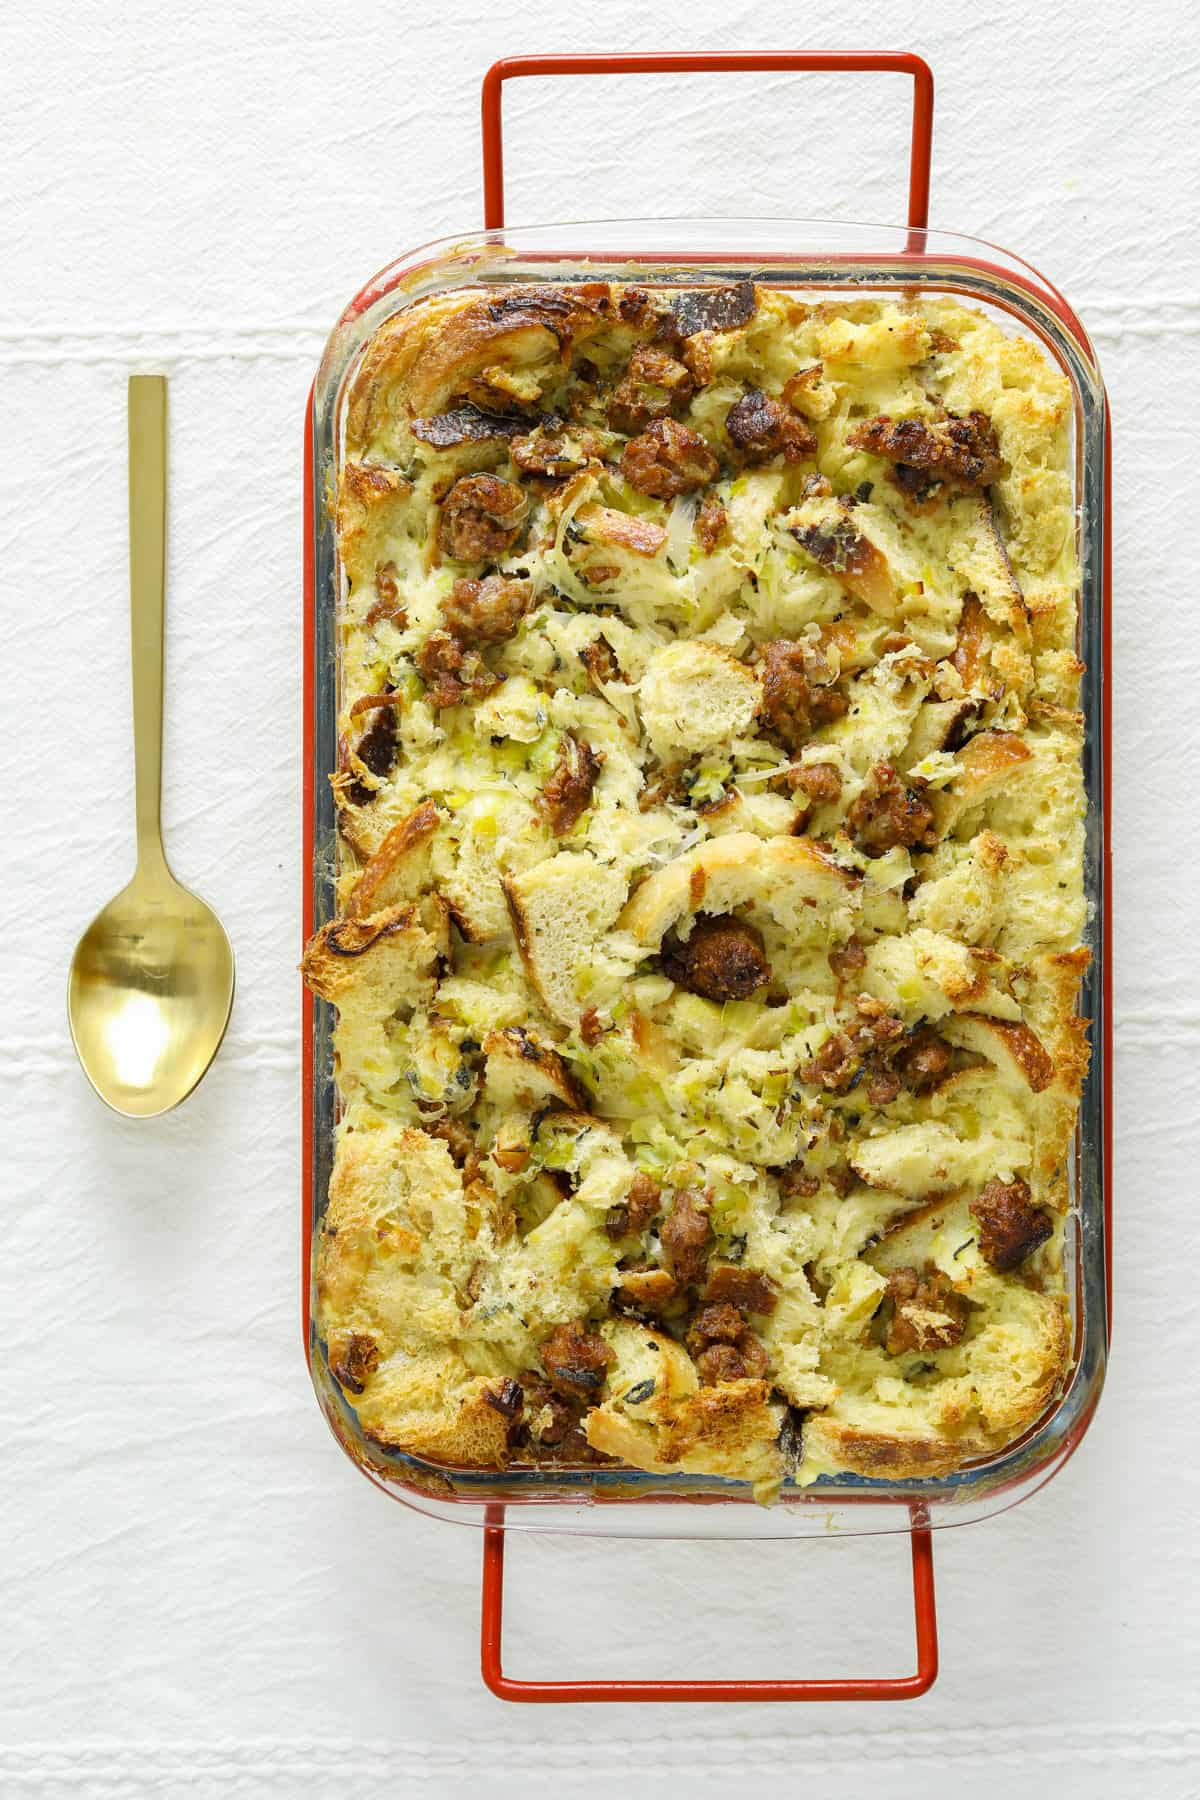 a rectangular glass baking dish with red handles filled with savory bread pudding with sausage.